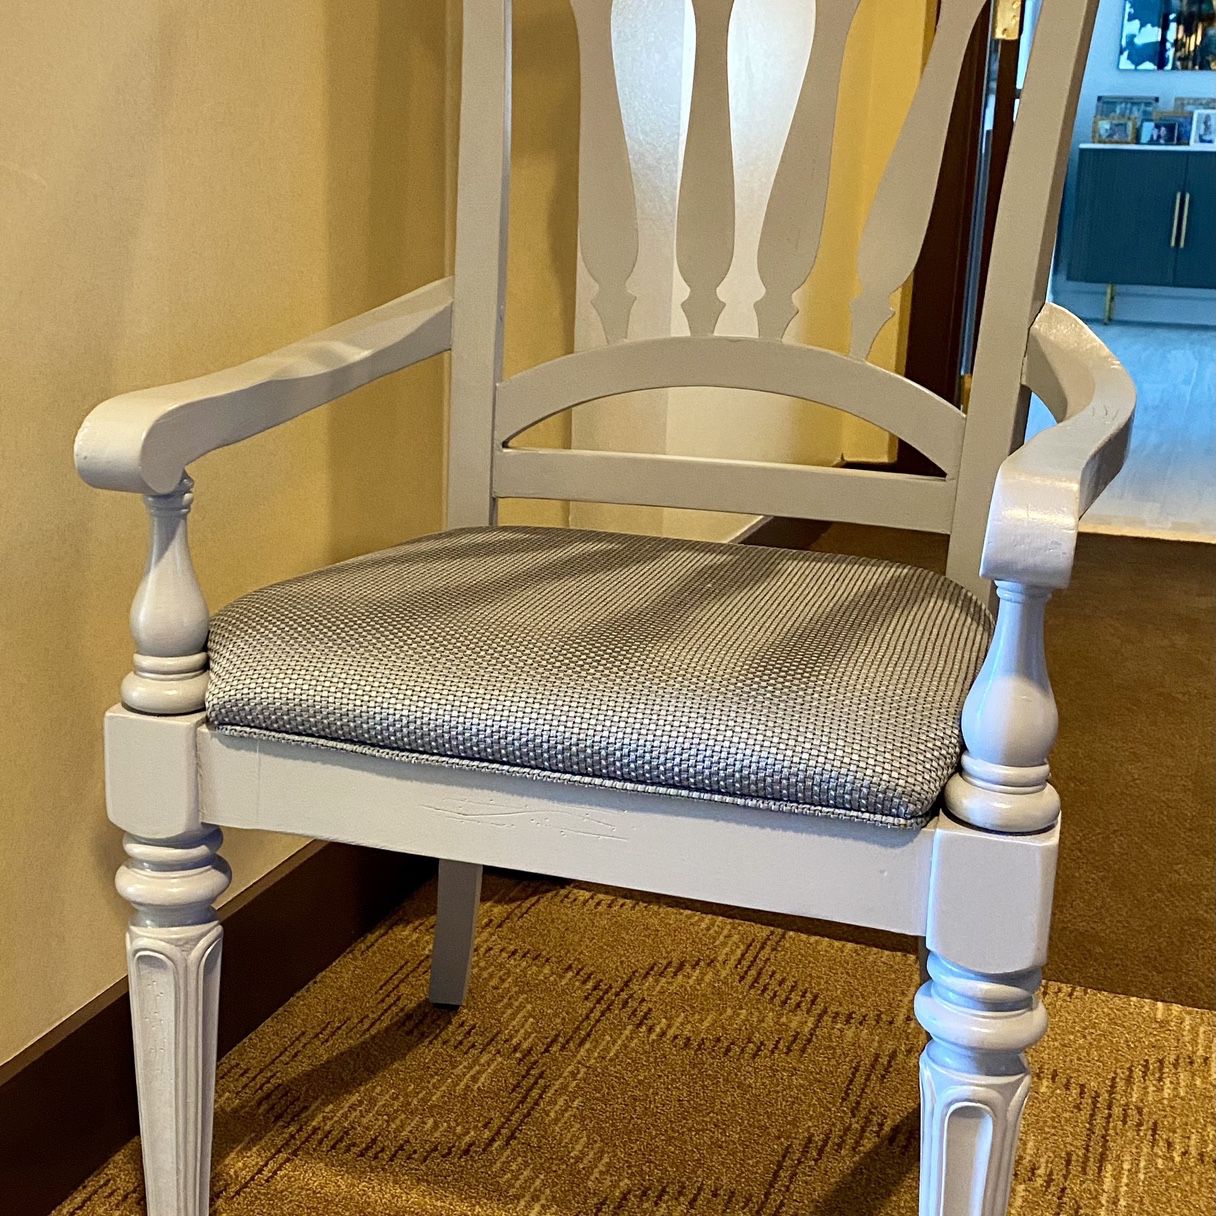 Newly Refurbished Dining Room Chairs (8 Total)